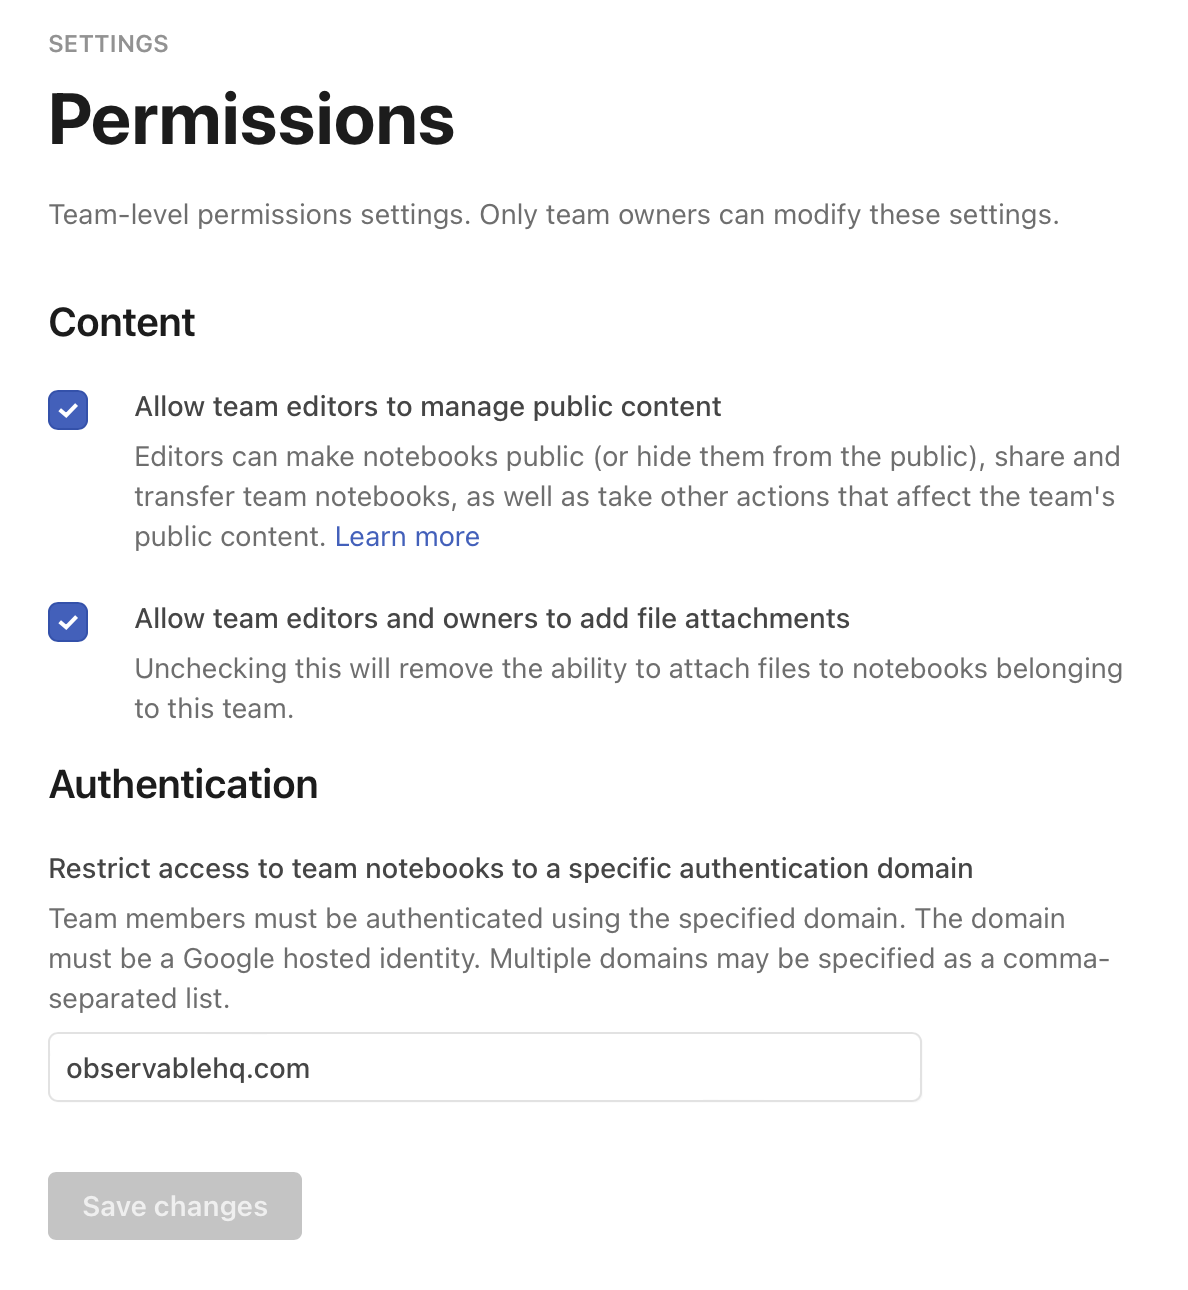 Screenshot of the Permissions tab in the Settings, showing checkboxes to enable or disable team editors managing public content and file attachments.